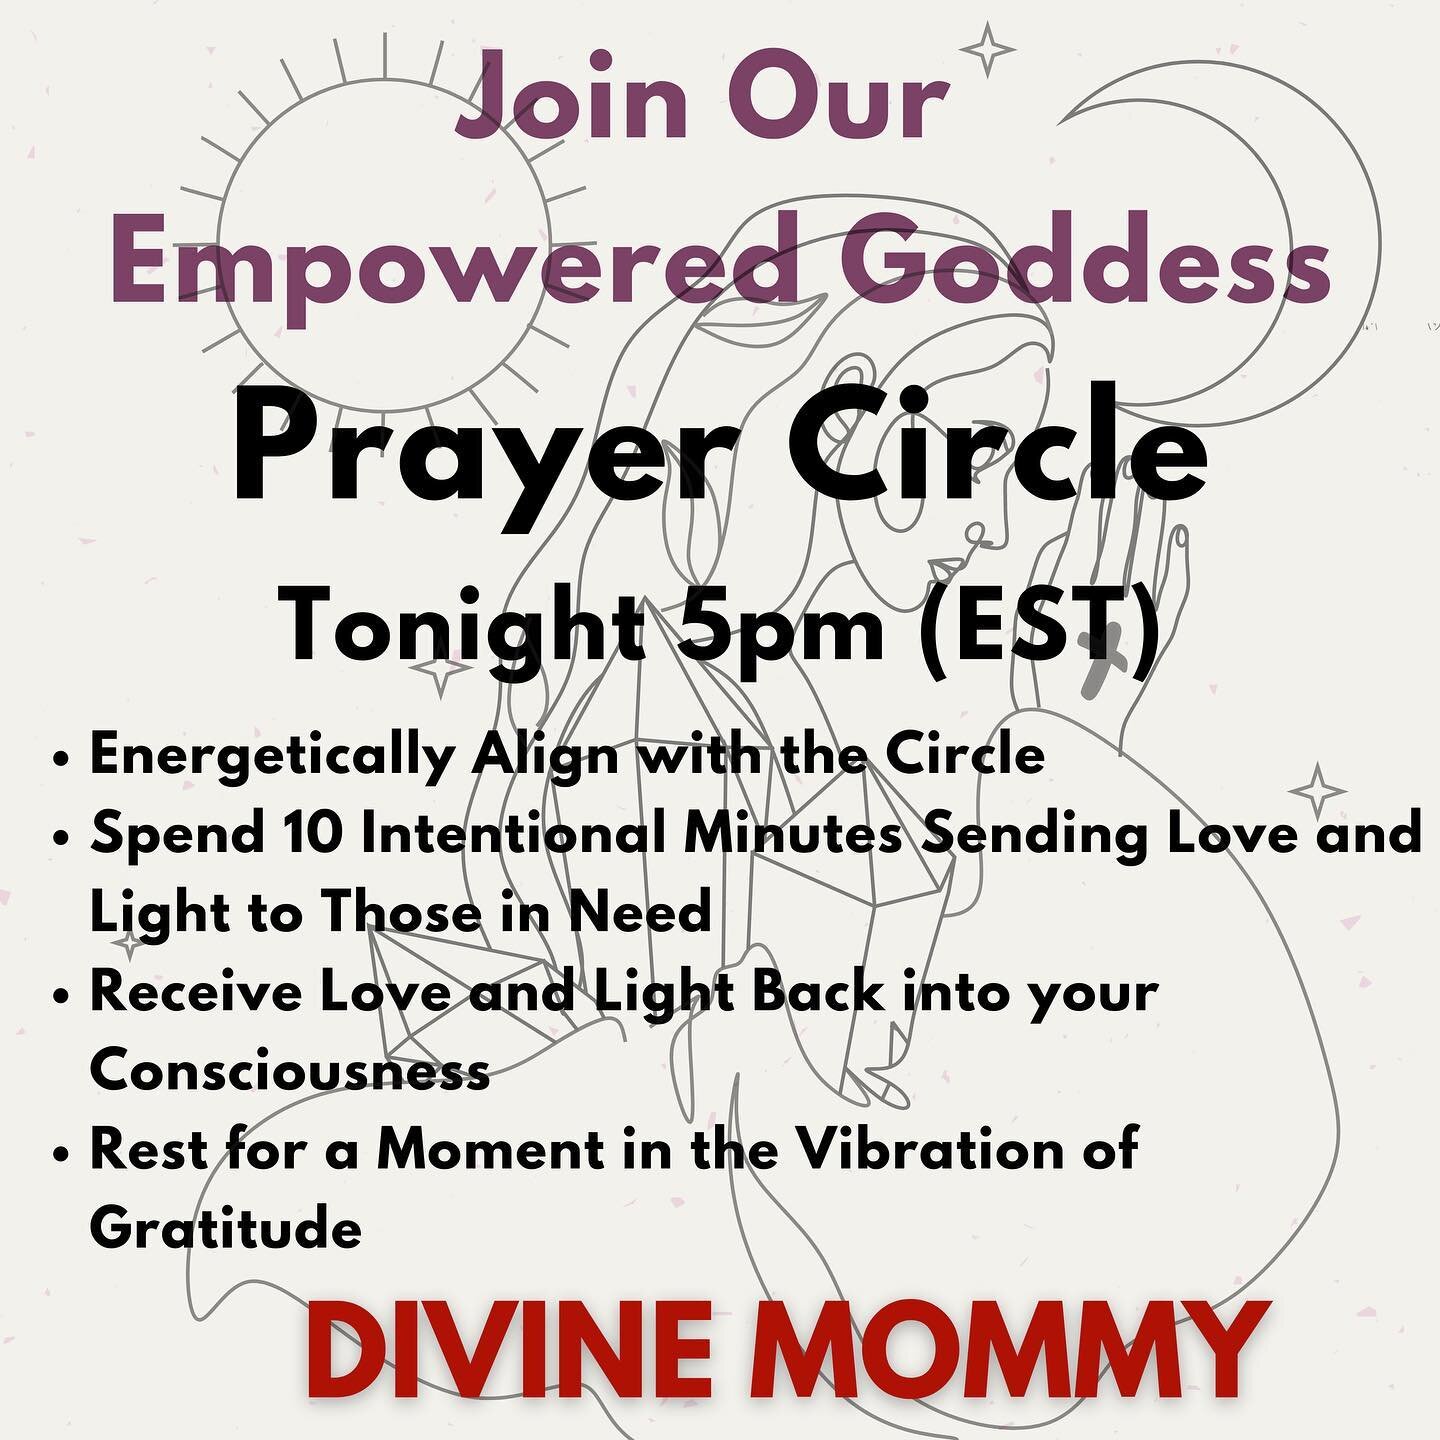 Happy #selfcaresaturday @divine.mommy &amp; @soultosisterhood Families.

Yesterday's Prayer Circle was ✨POWERFUL!✨

Let's keep it going today.

10 Minutes of Intentional, Purposeful Love and Light going out for the Greatest and Highest Good.

Energy 